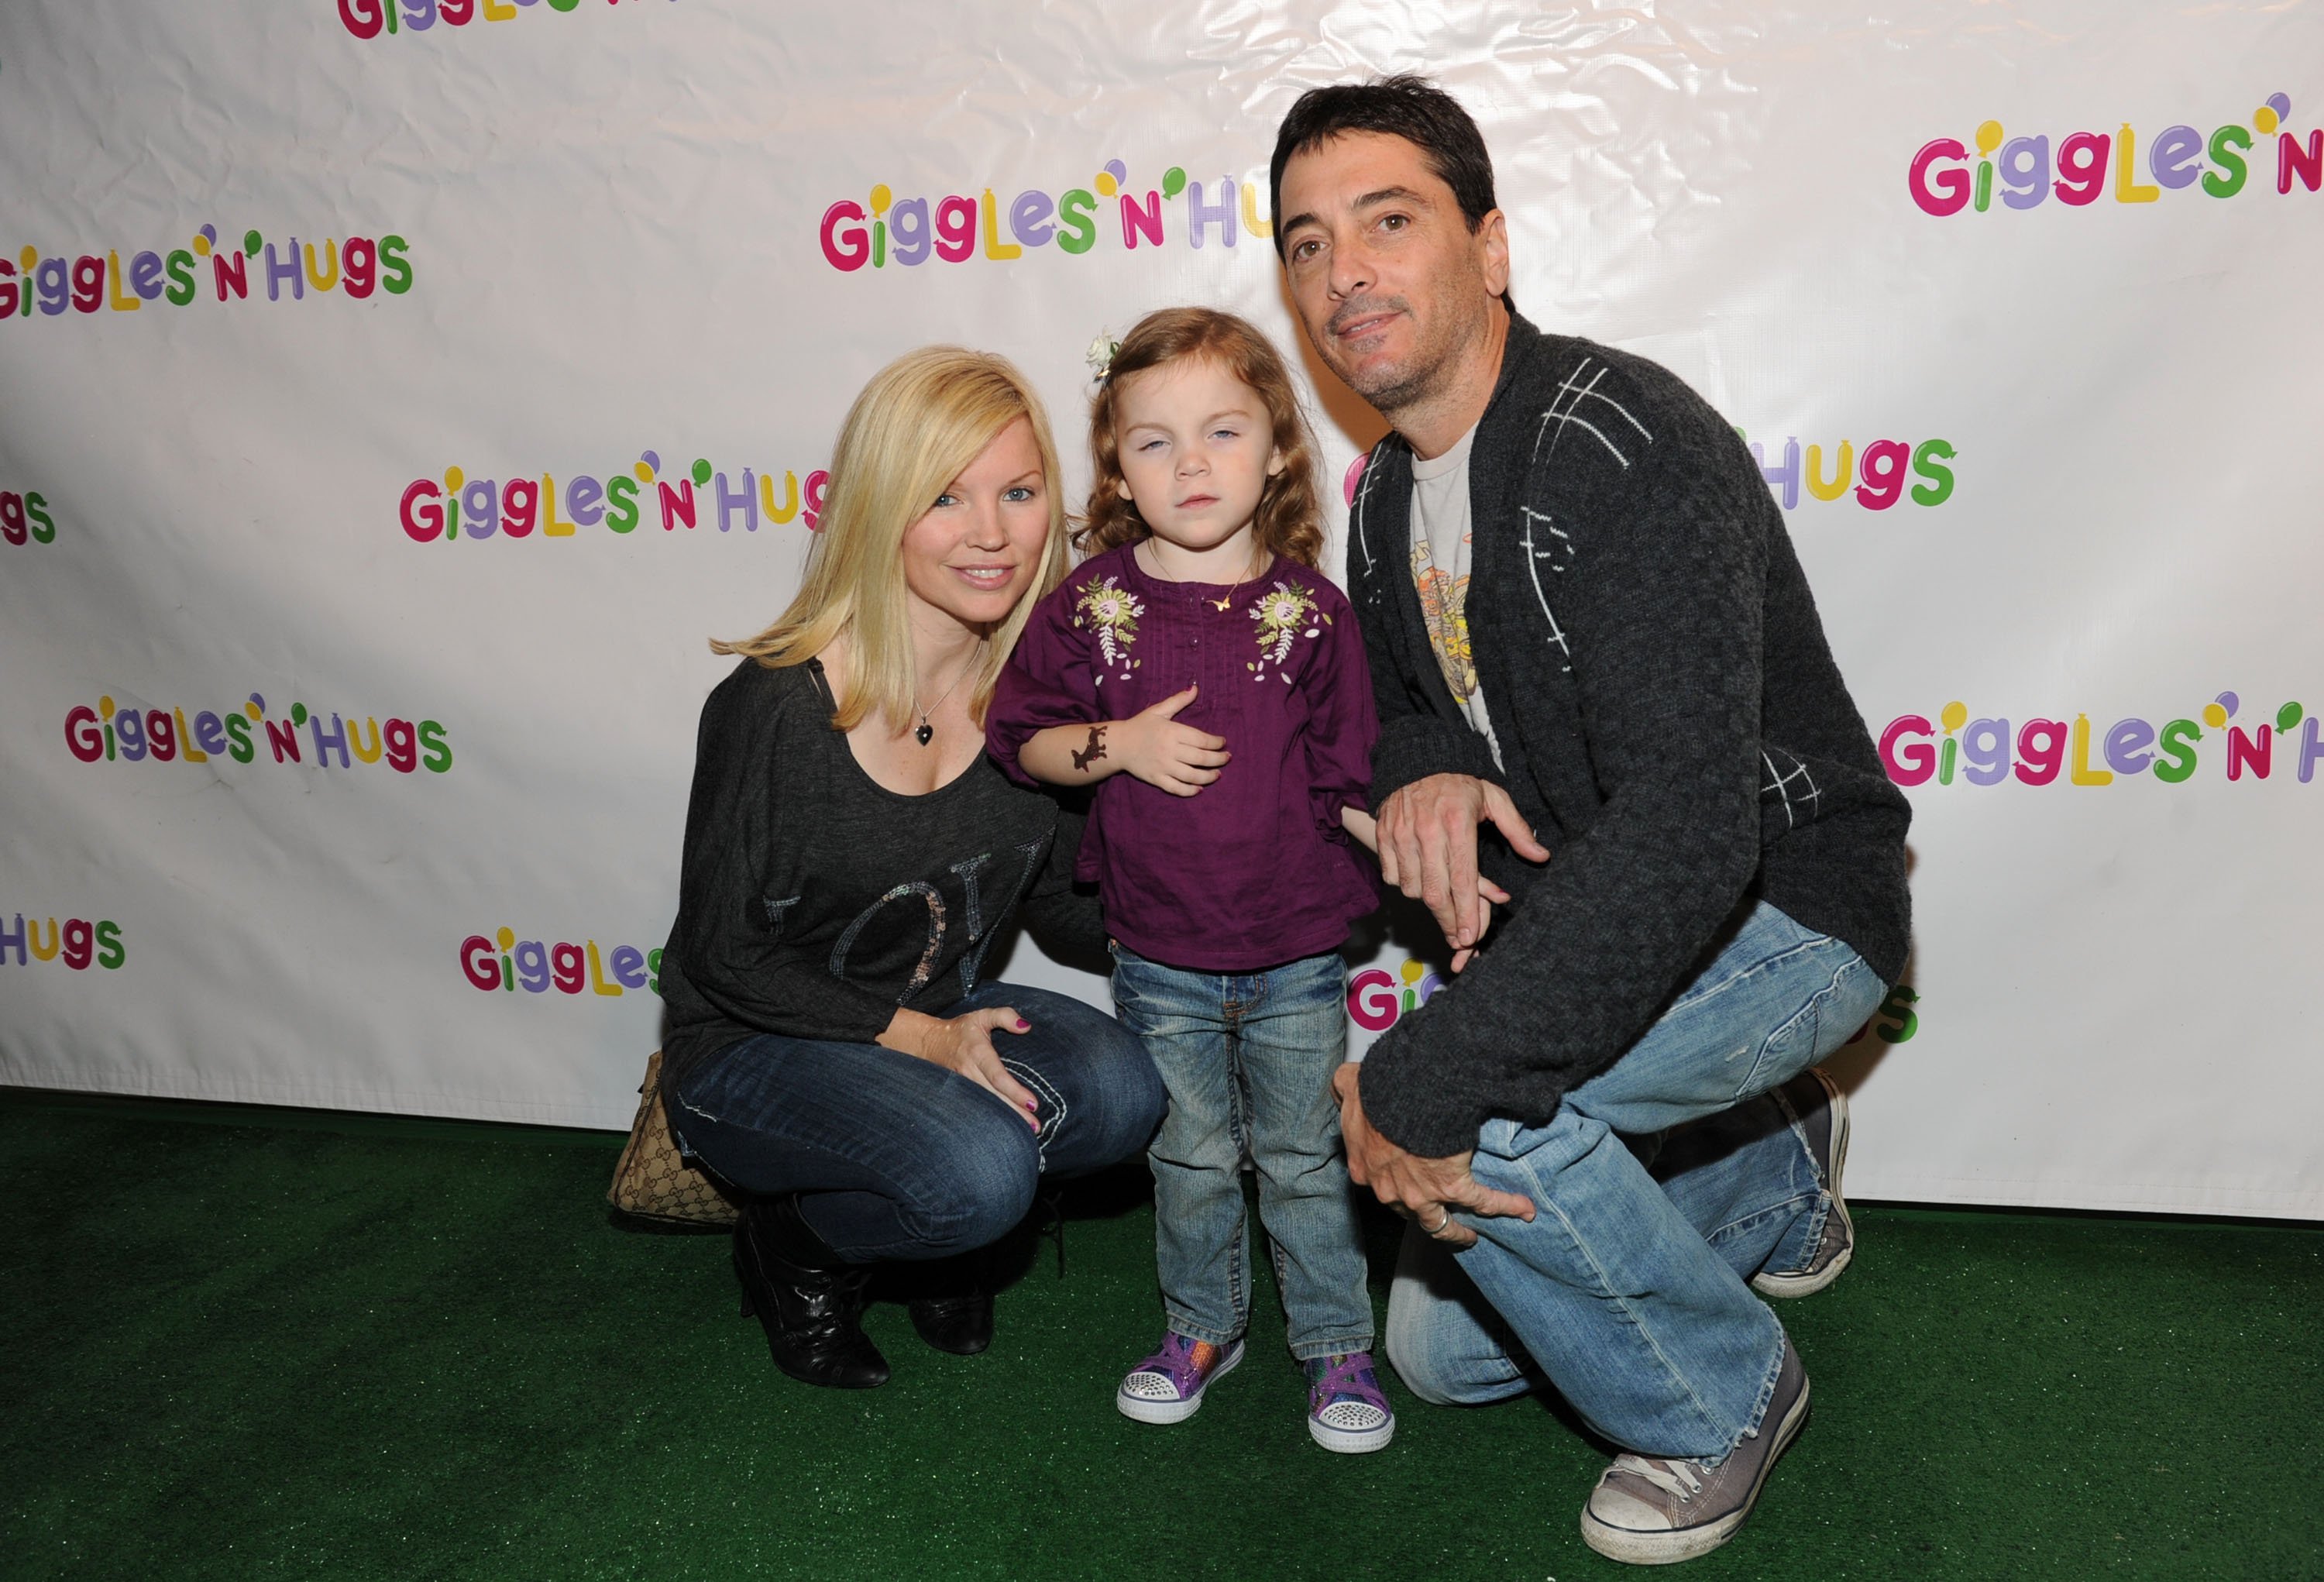 Scott Baio and family Renee Sloan and daughter Bailey DeLuca Baio arriving at Giggles 'N' Hugs opening party at Westfield Century City Mall on December 3, 2010 in Century City, California. / Source: Getty Images